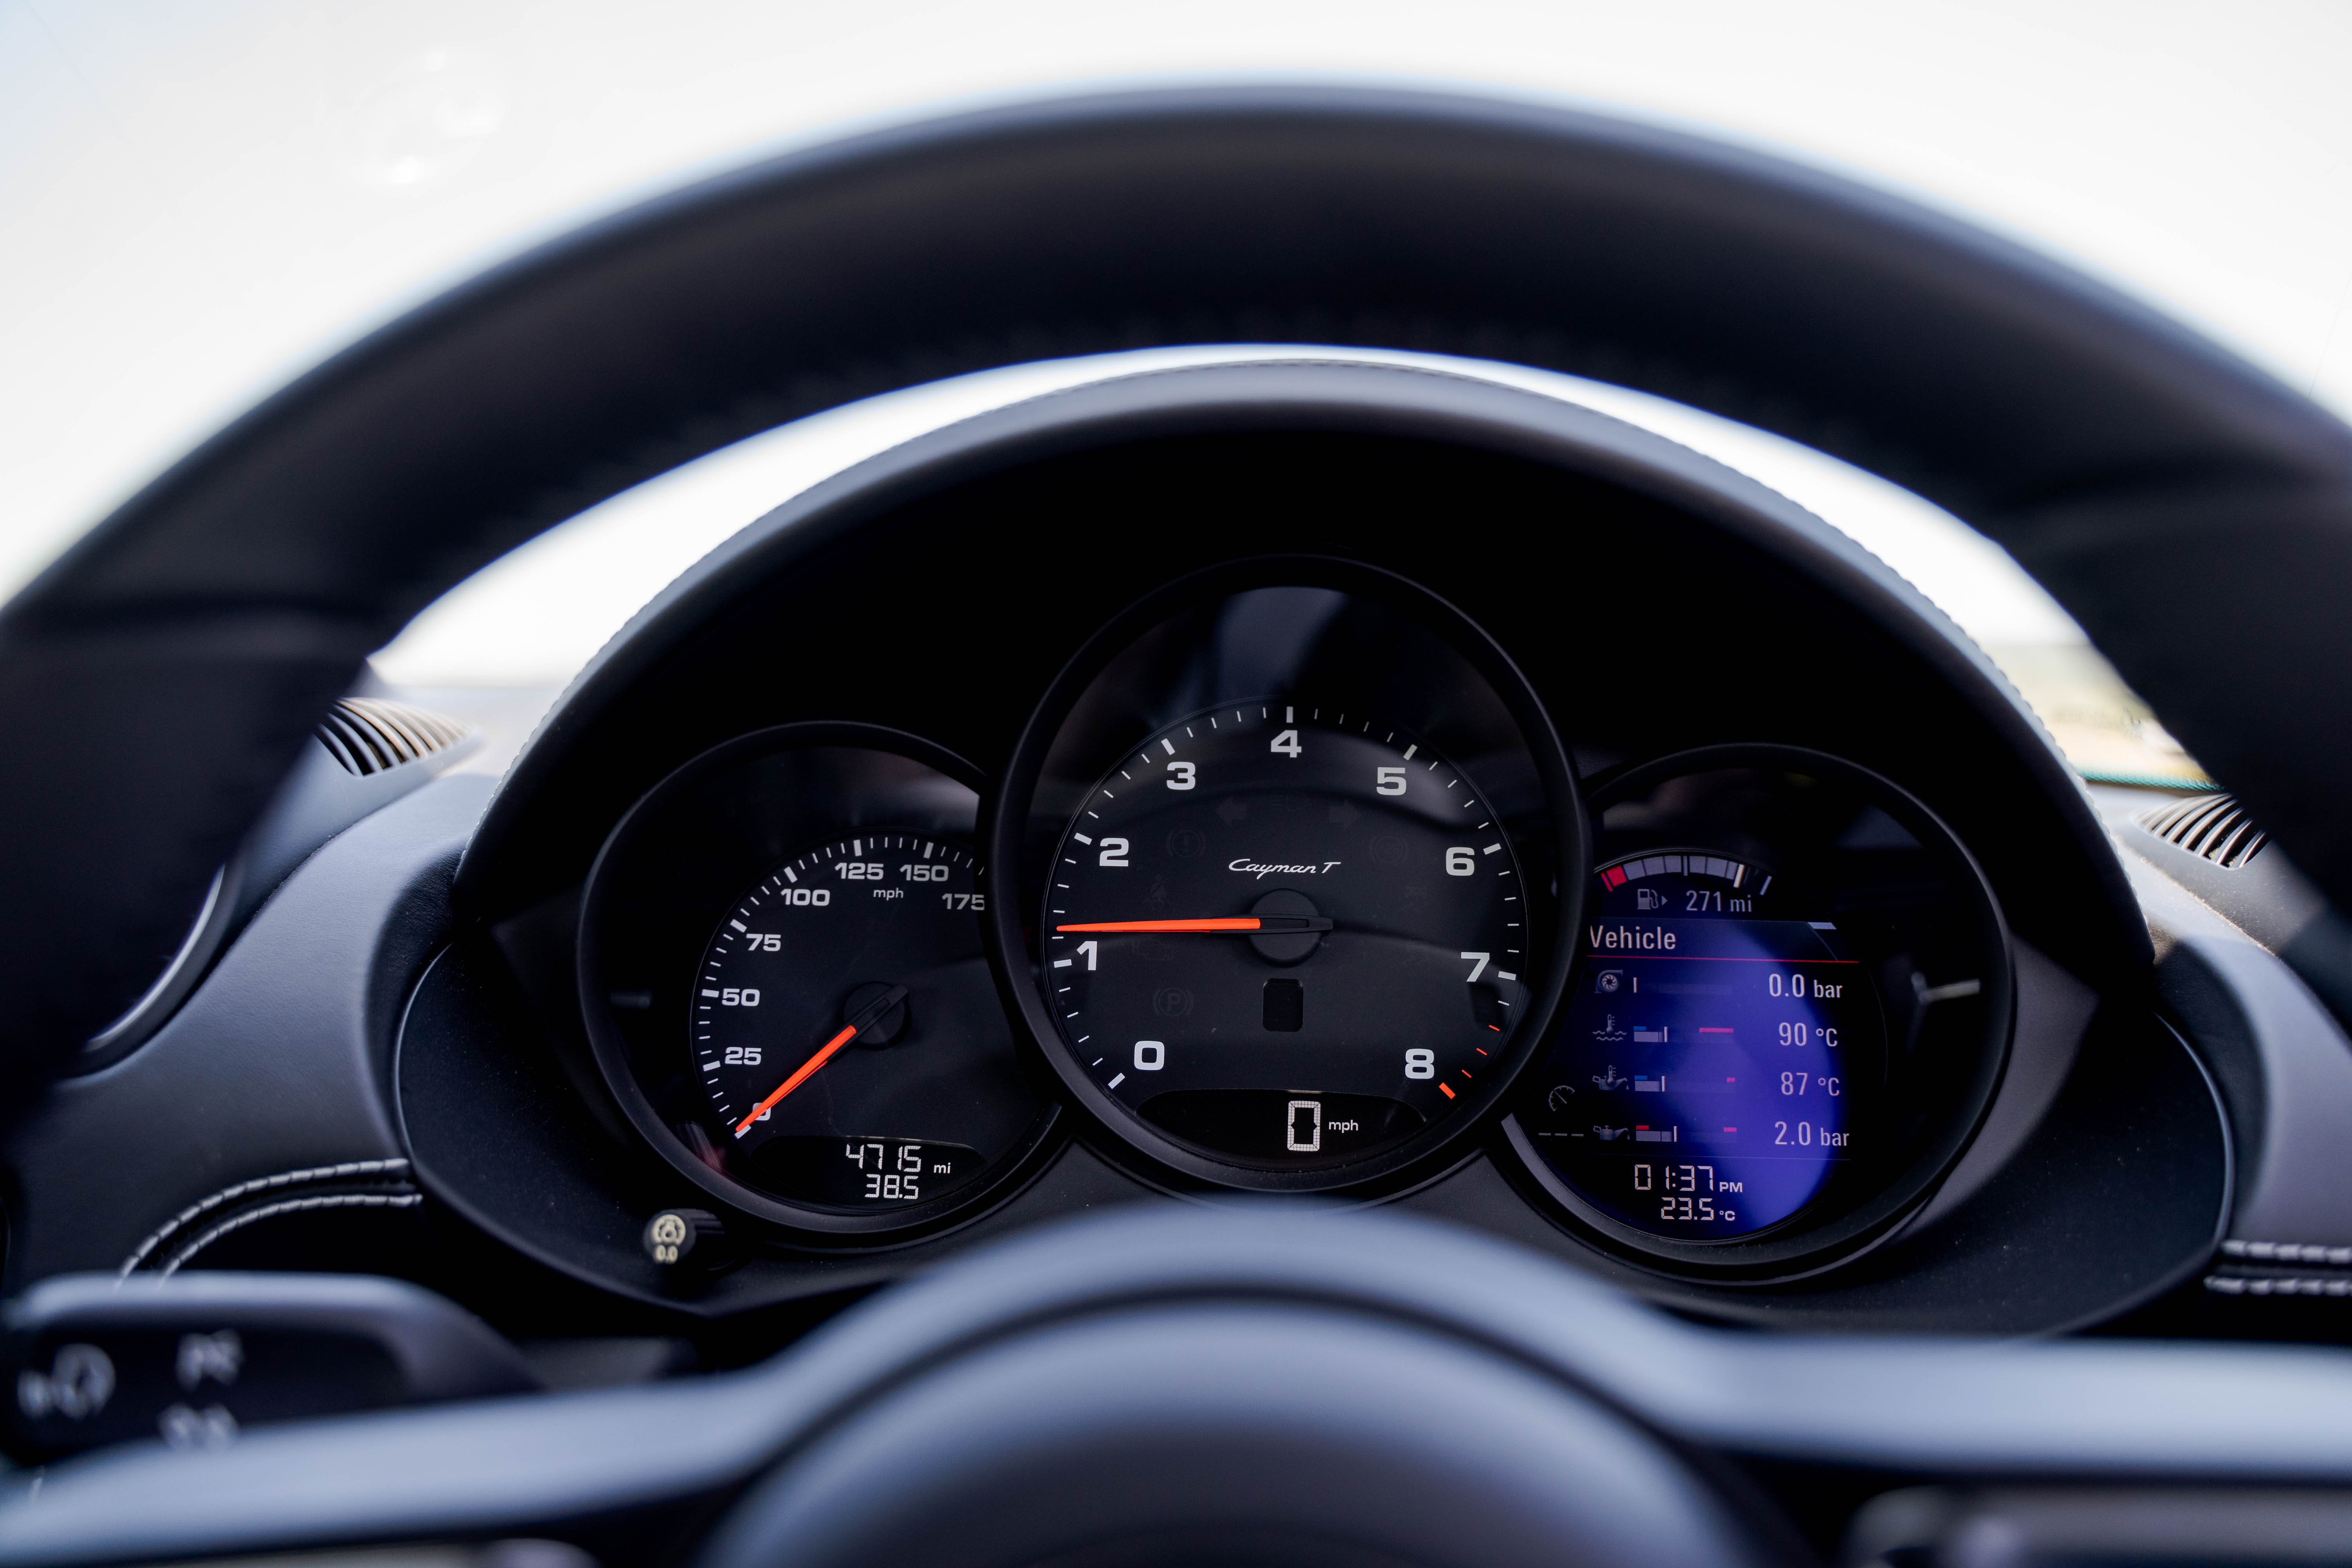 The Porsche's dials are delightfully uncluttered